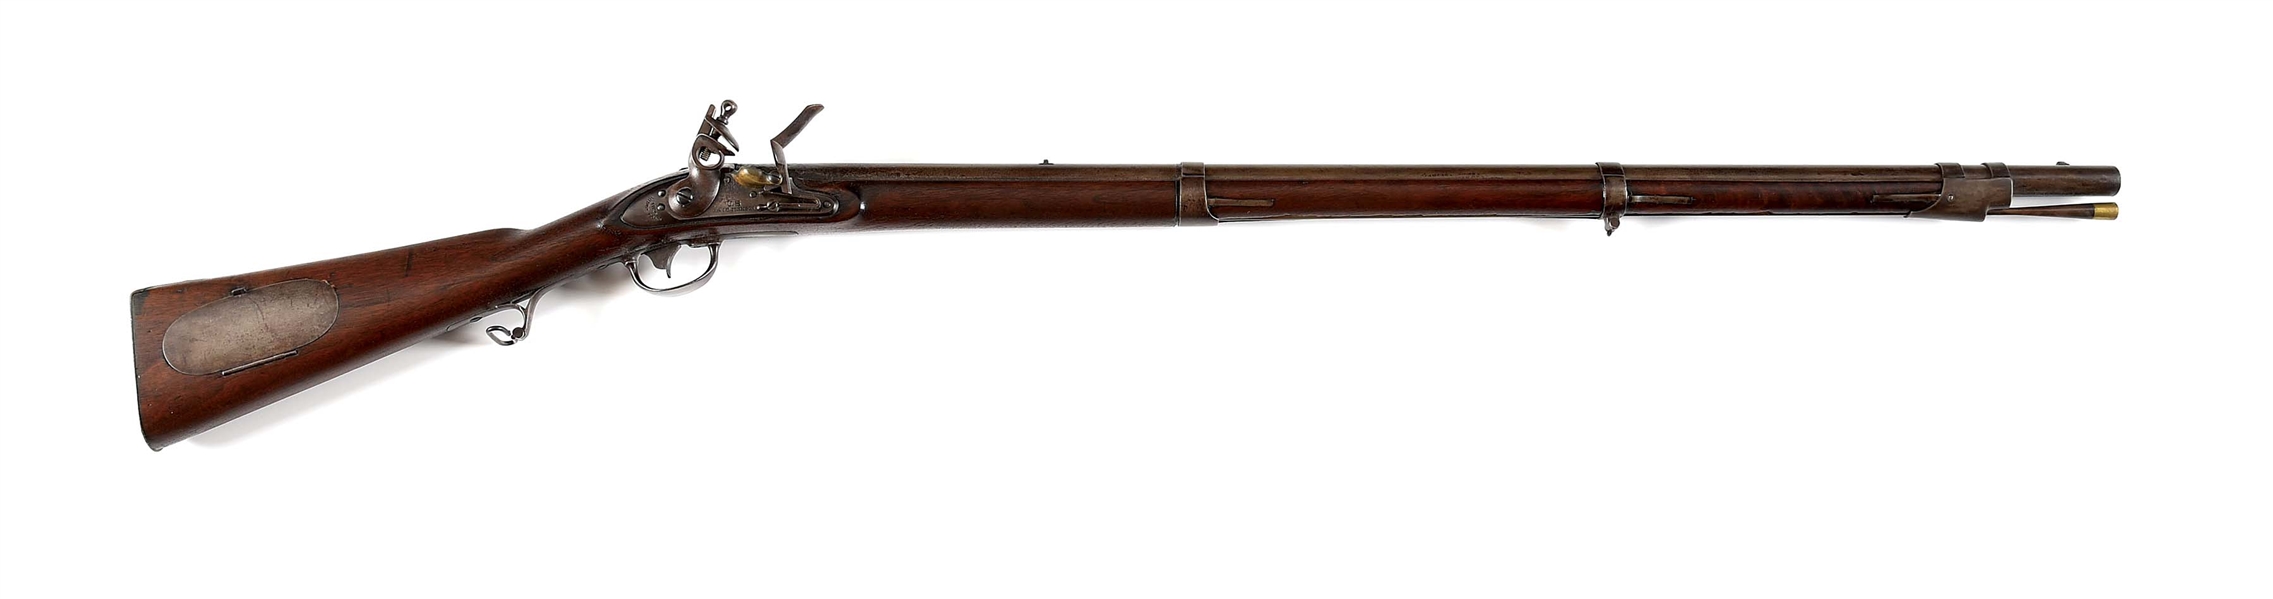 (A) JOHNSON 1817 COMMON RIFLE DATED 1825.